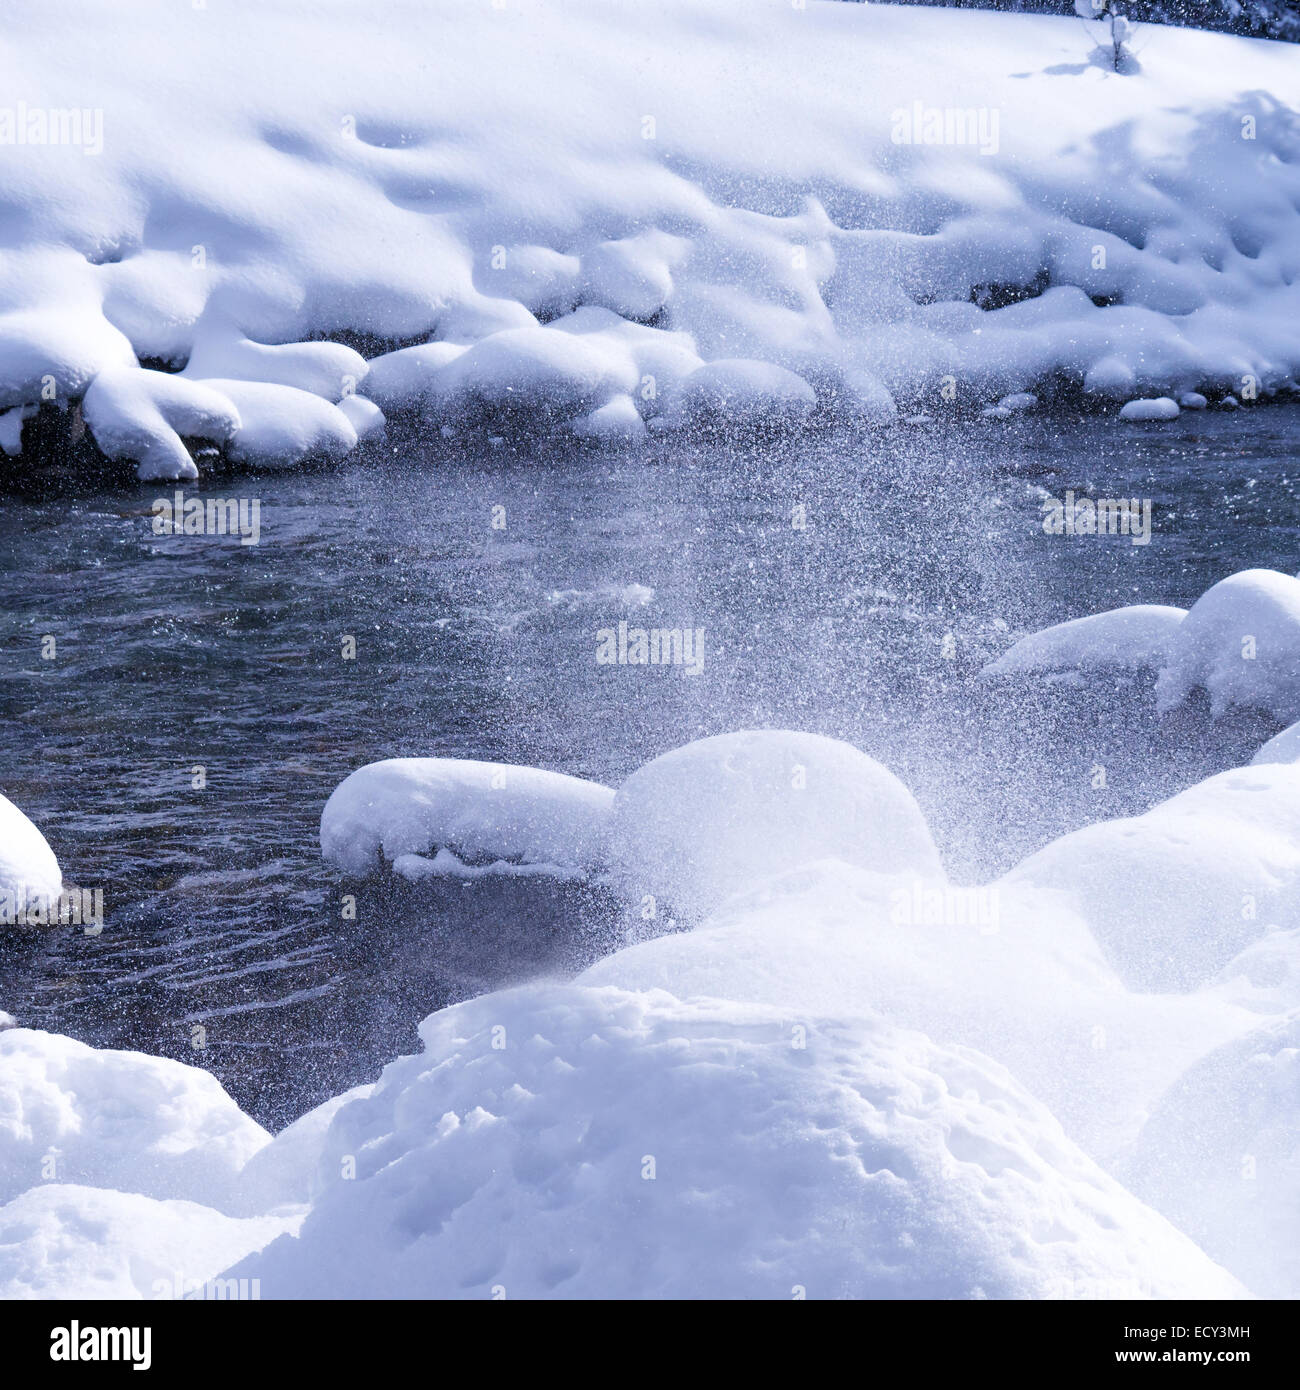 snow and water of a river in winter Stock Photo